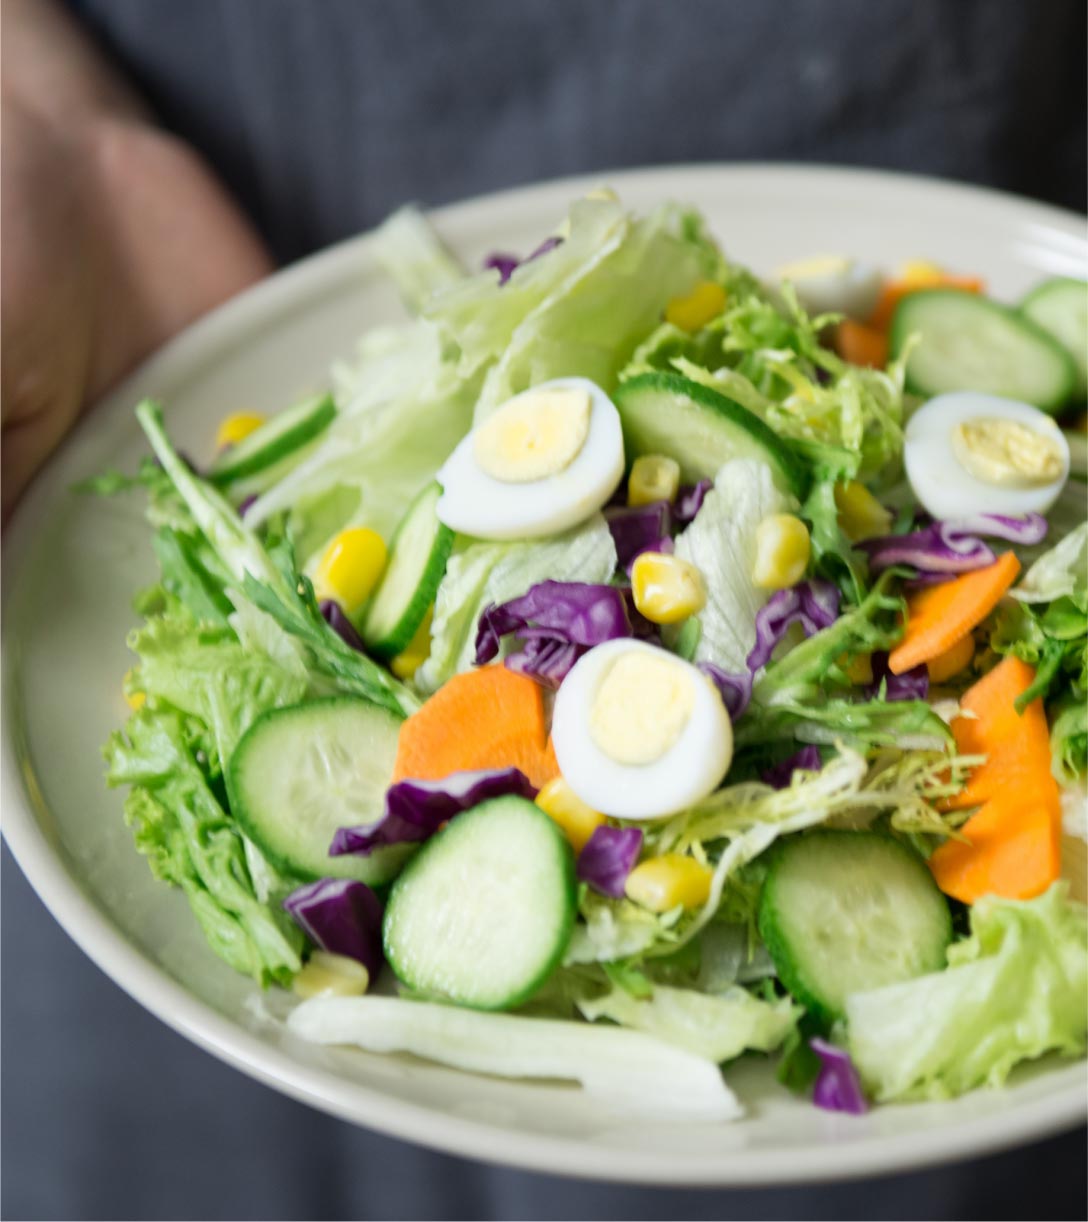 A bowl of fresh salad with mixed greens and vegetables